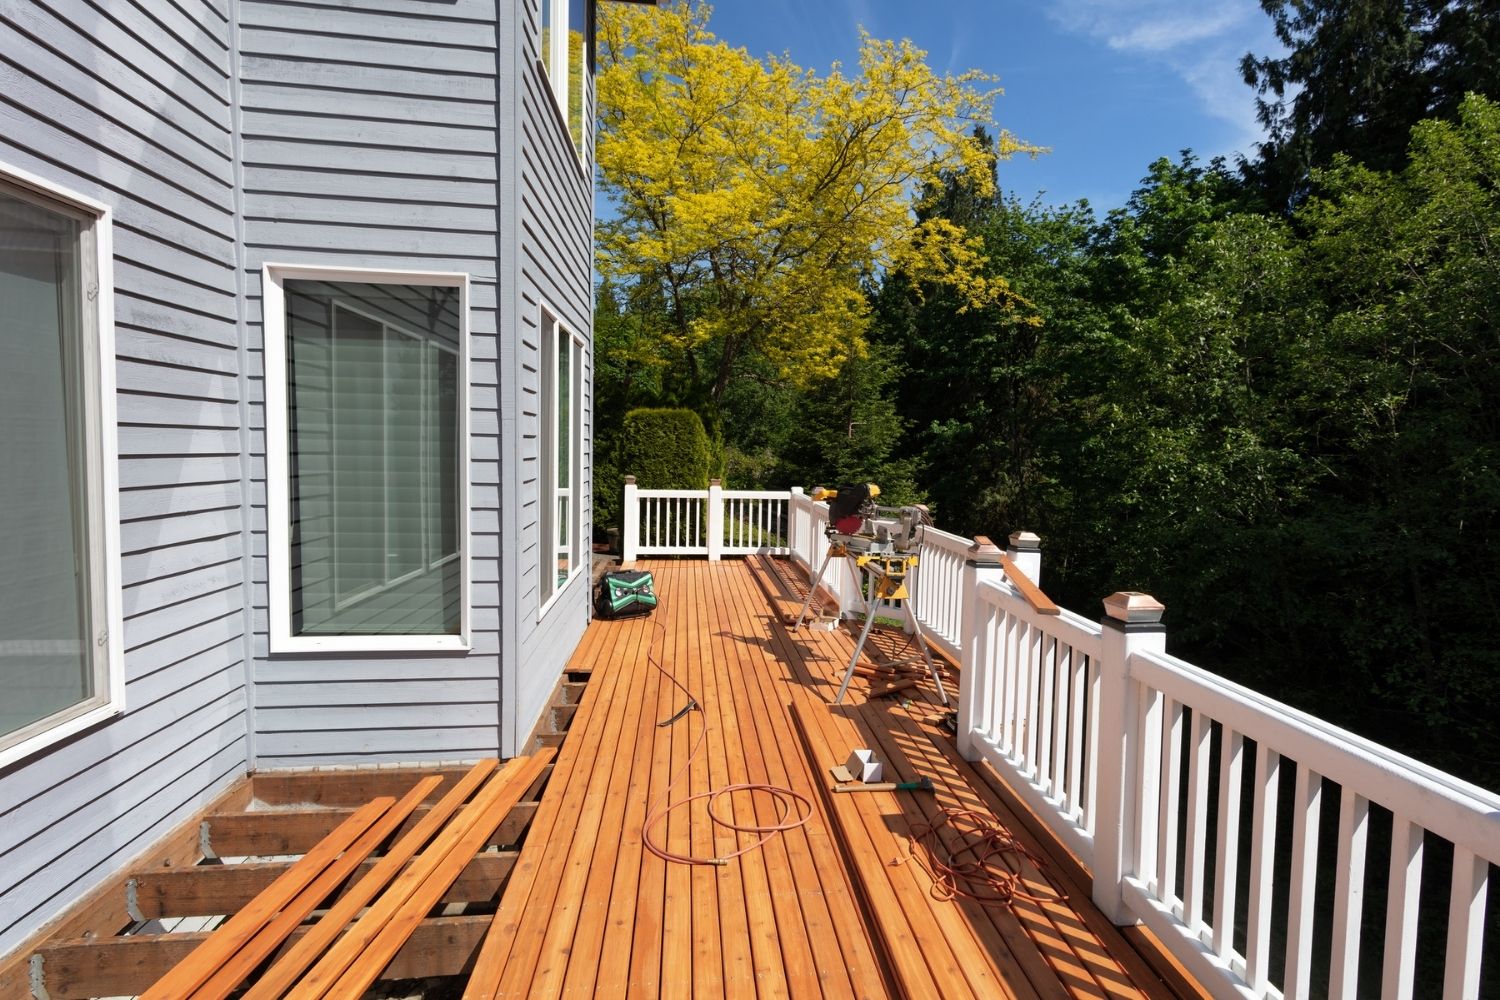 A deck is being repaired on a sunny day.